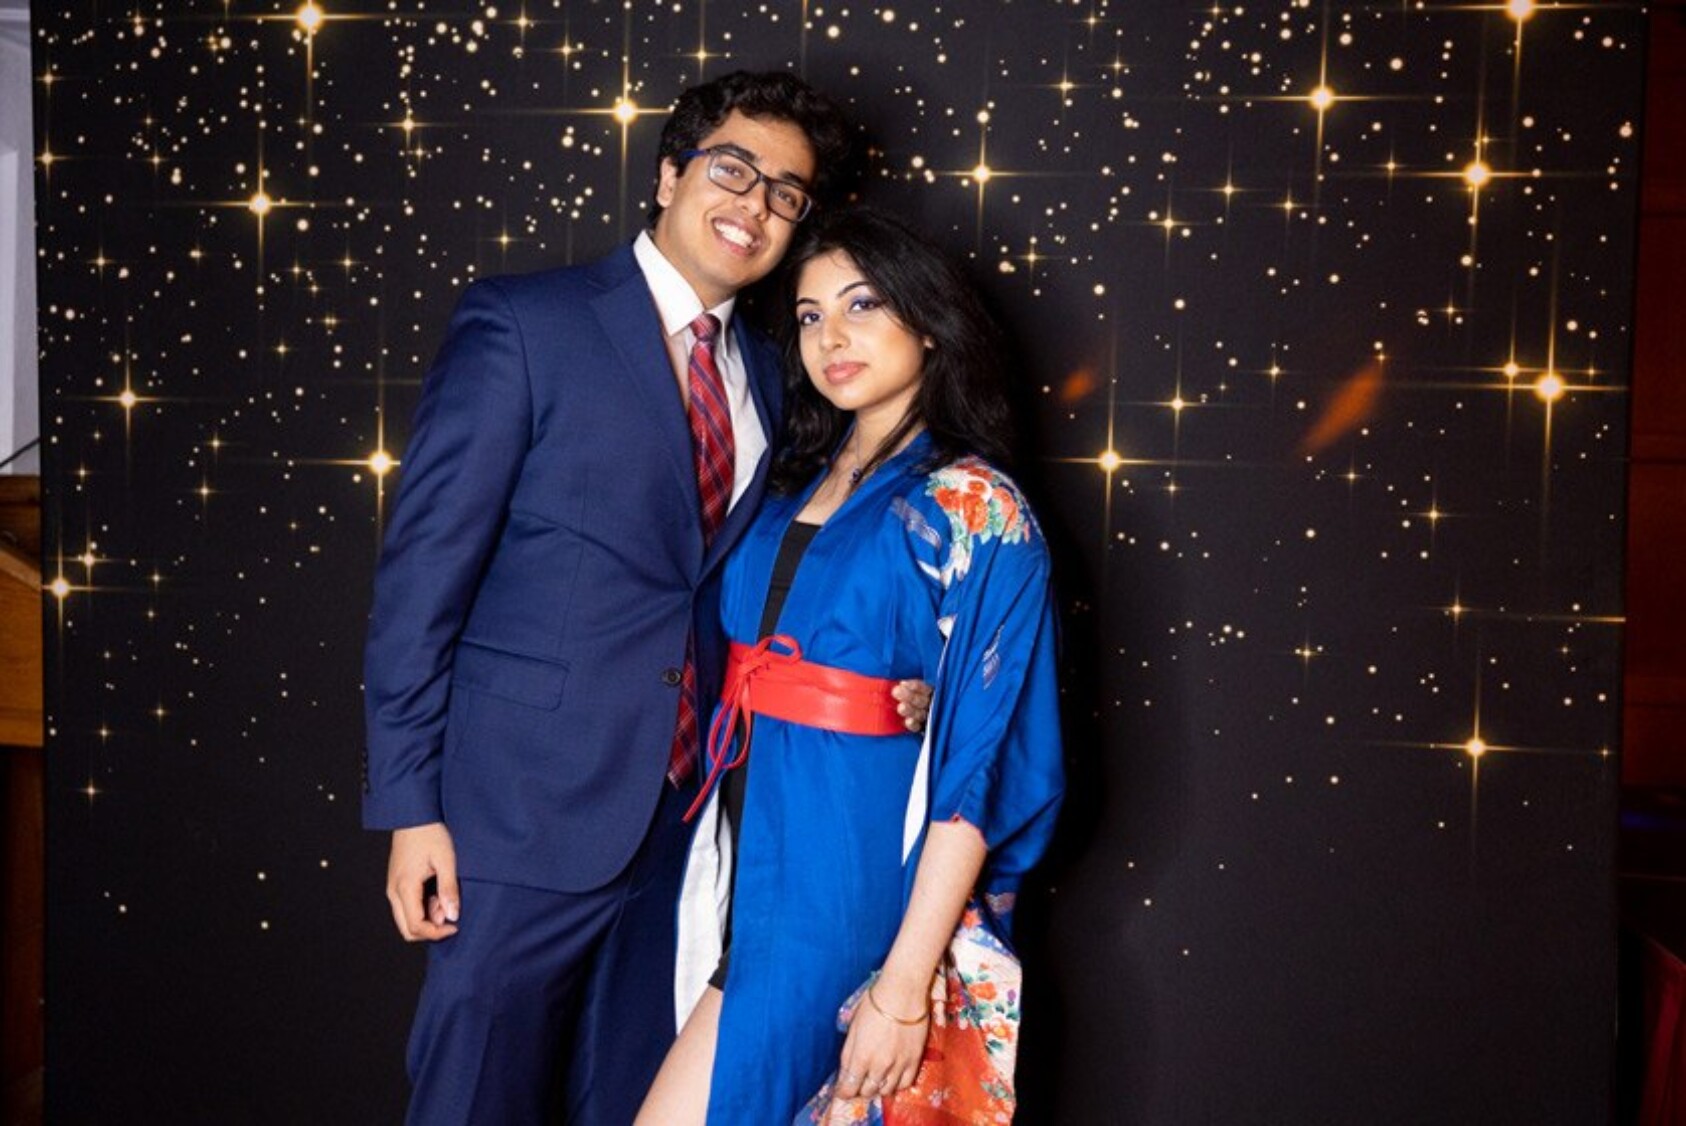 Atharva Barve ’25 in a hand-me-down suit from his older brother and Trisha Beher ’25 in a vintage kimono